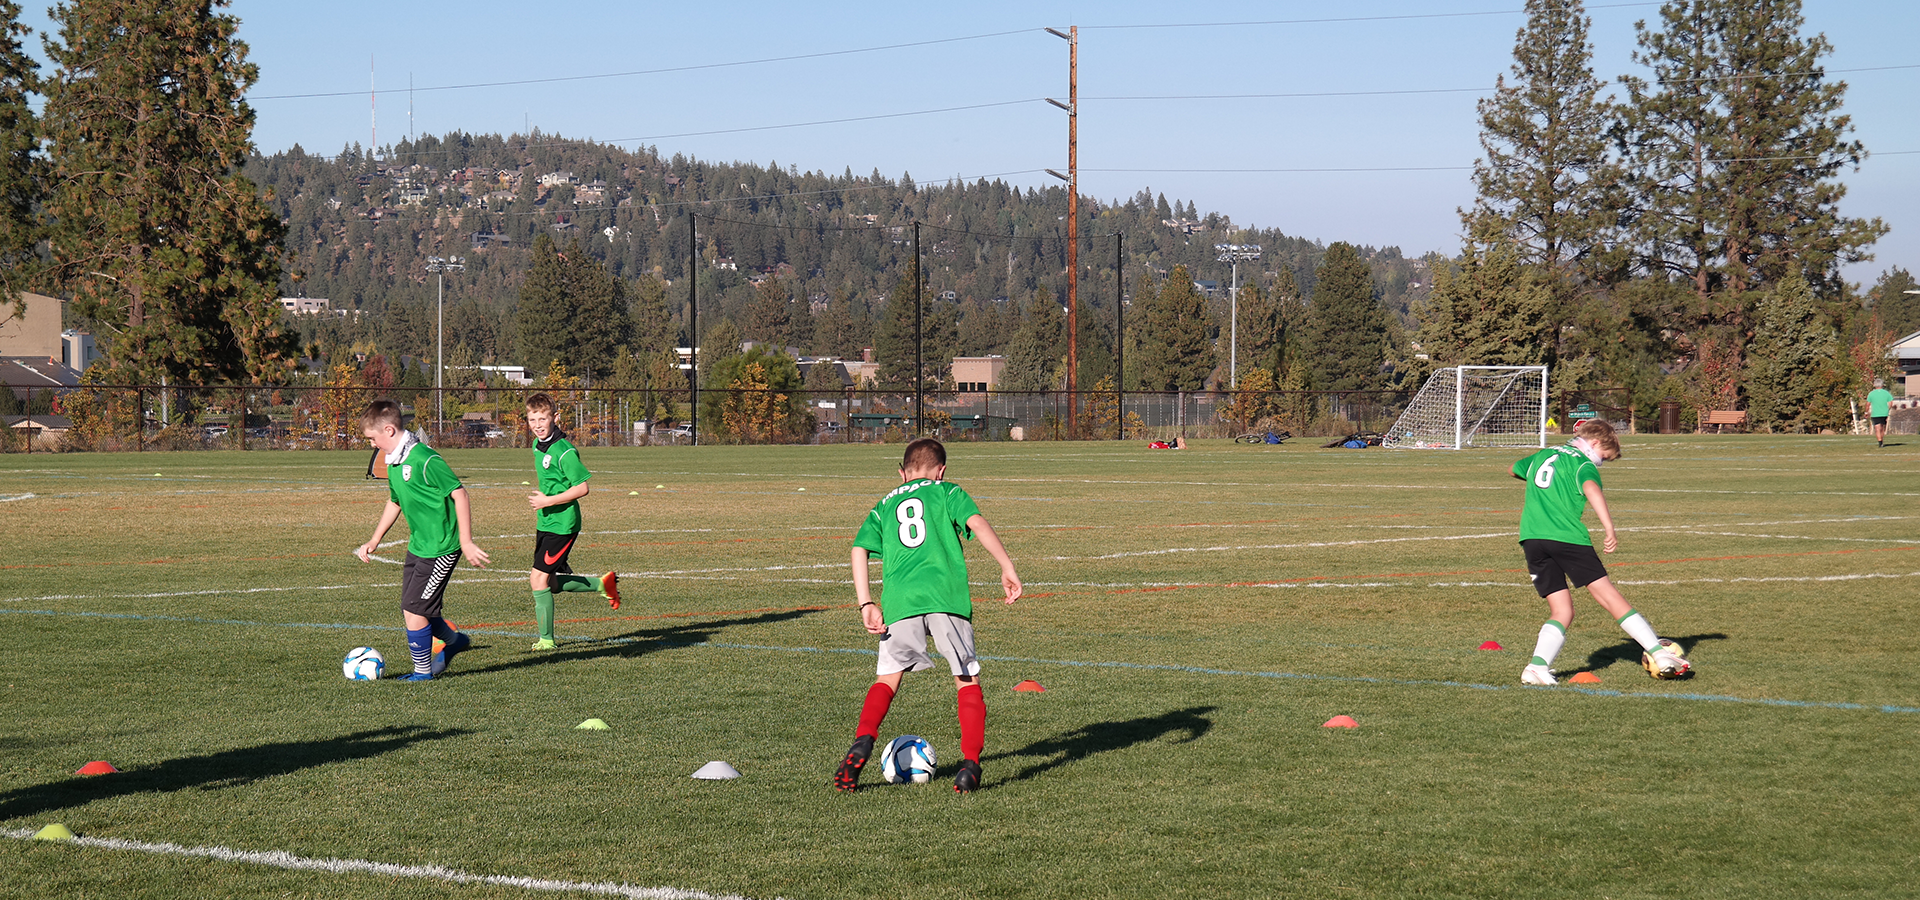 Boys practicing soccer at Pacific Crest's athletic fields.